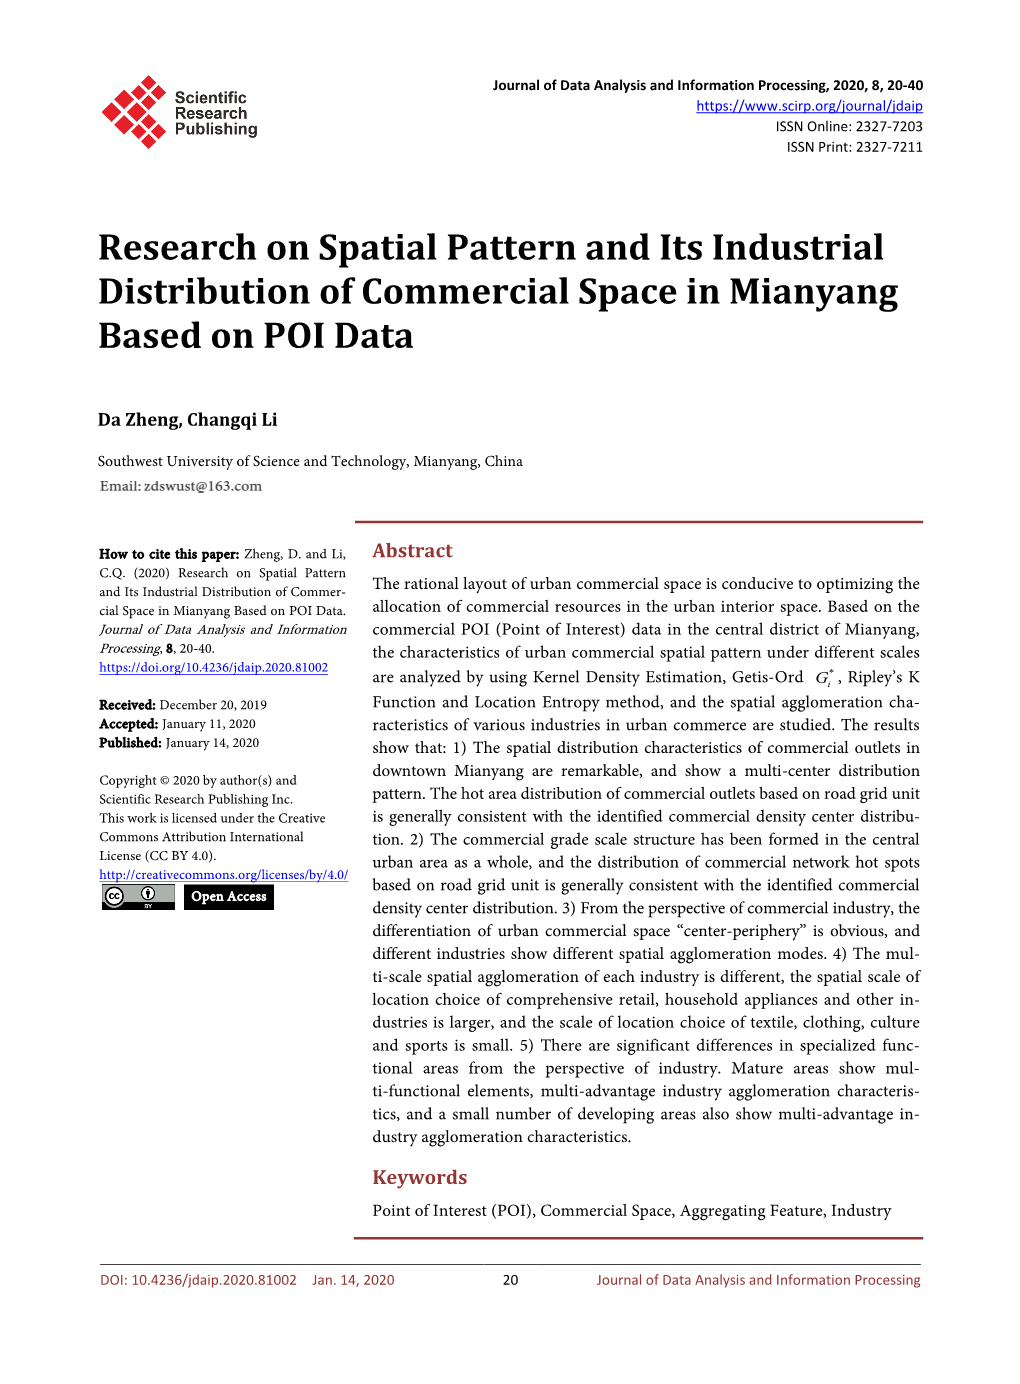 Research on Spatial Pattern and Its Industrial Distribution of Commercial Space in Mianyang Based on POI Data